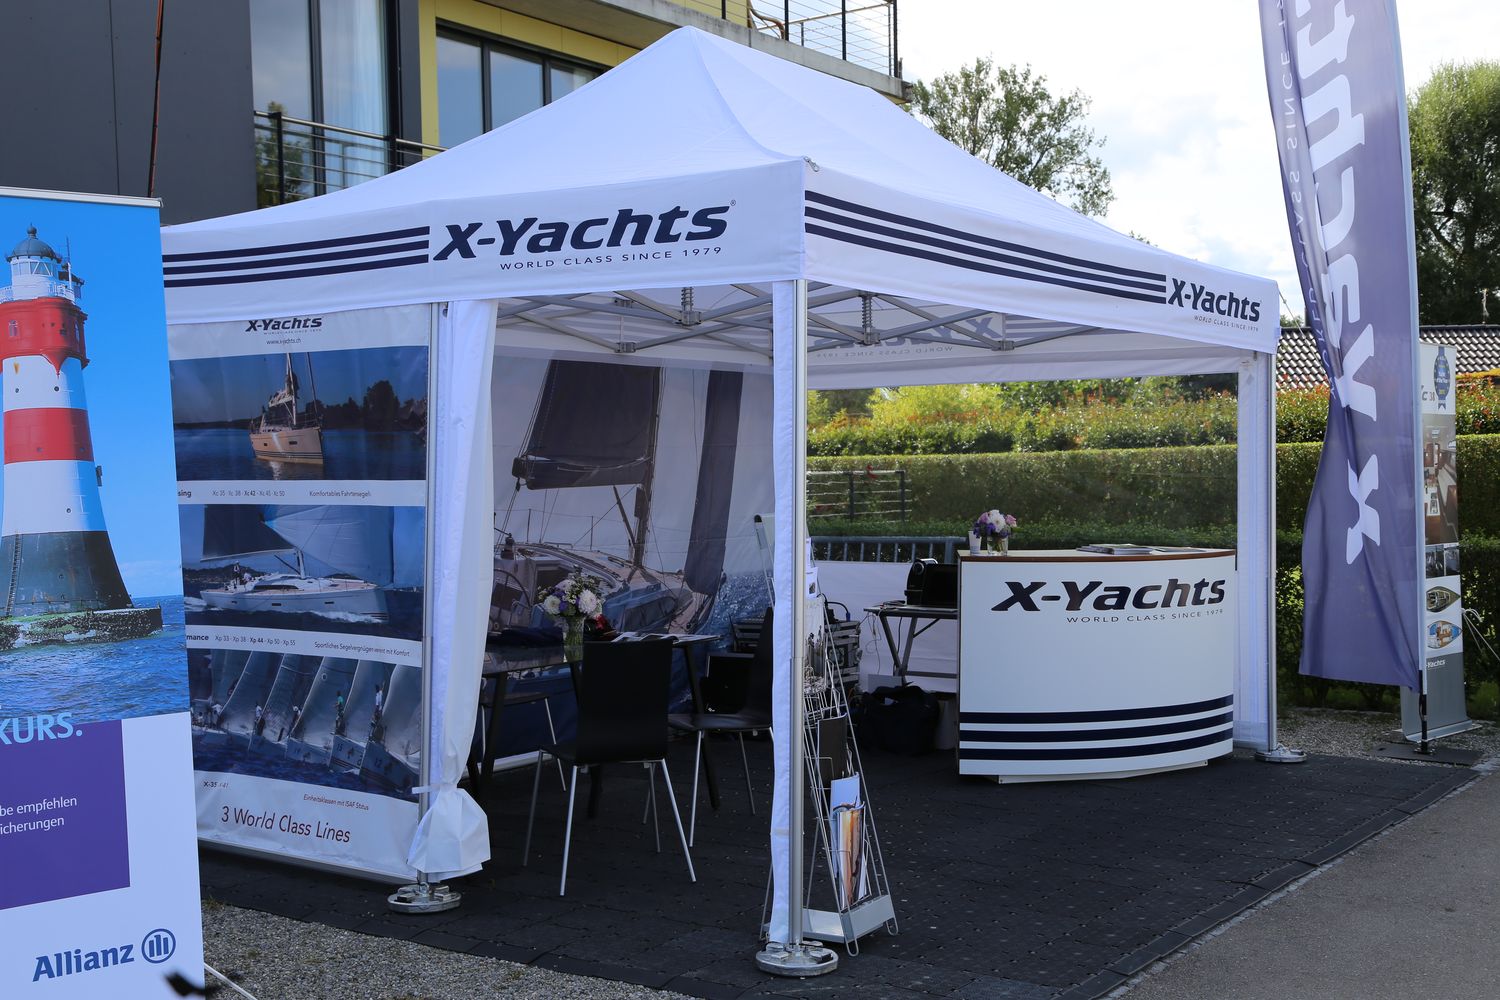 Pro-Tent floor panels in use under a folding pavilion from X-Yachts.